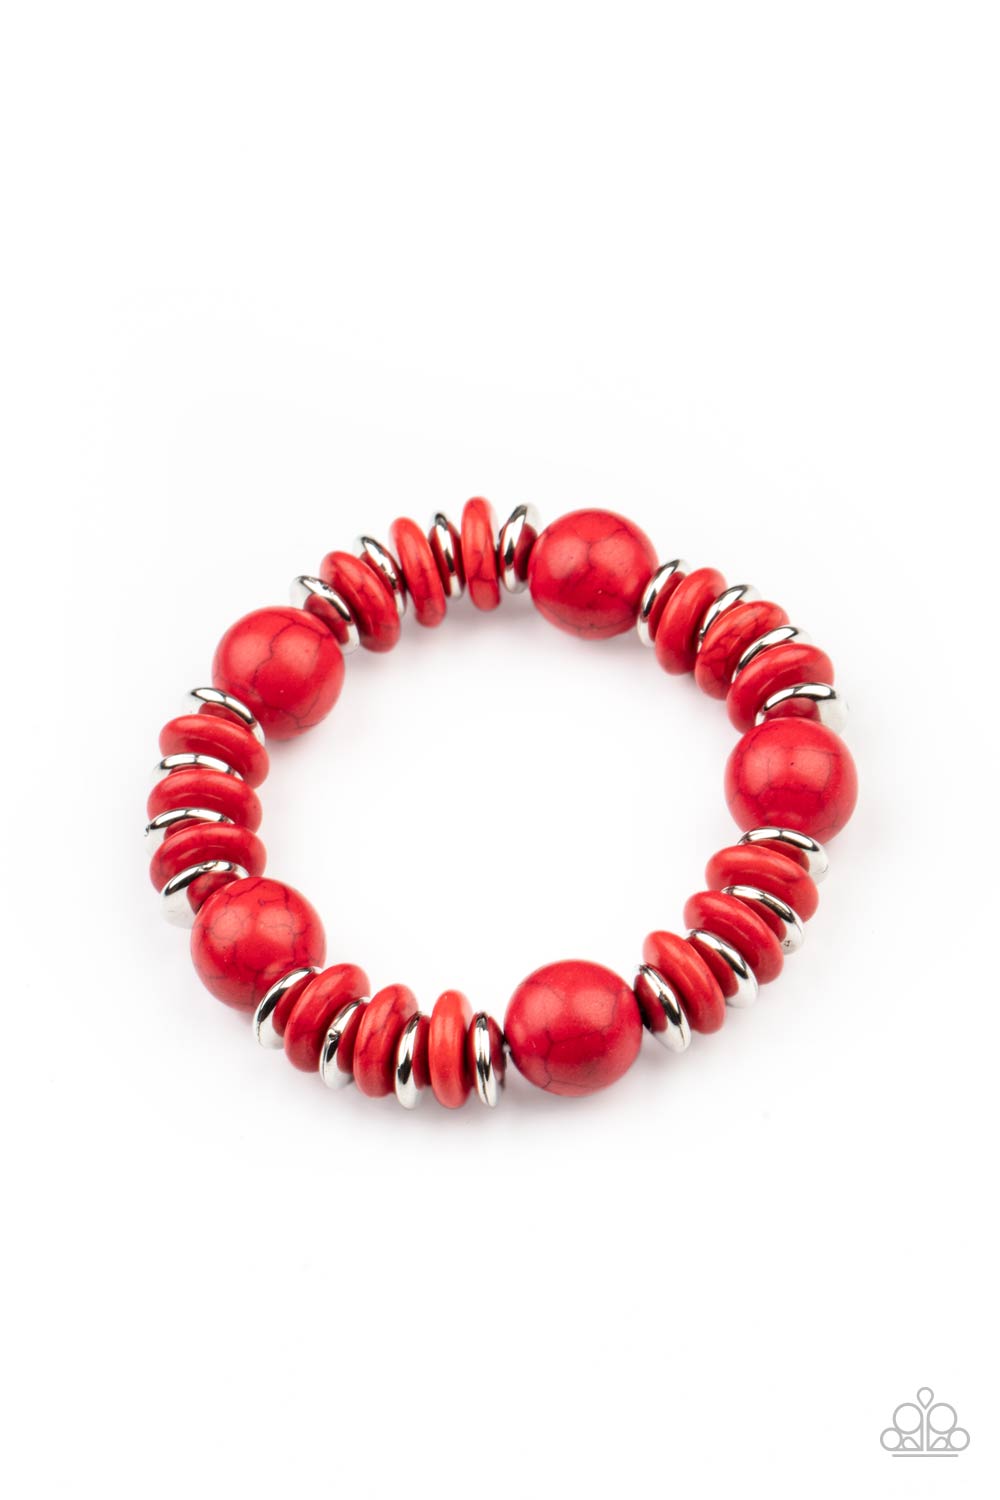 Rustic Rival Red Stone and Silver Bracelet - Paparazzi Accessories- lightbox - CarasShop.com - $5 Jewelry by Cara Jewels